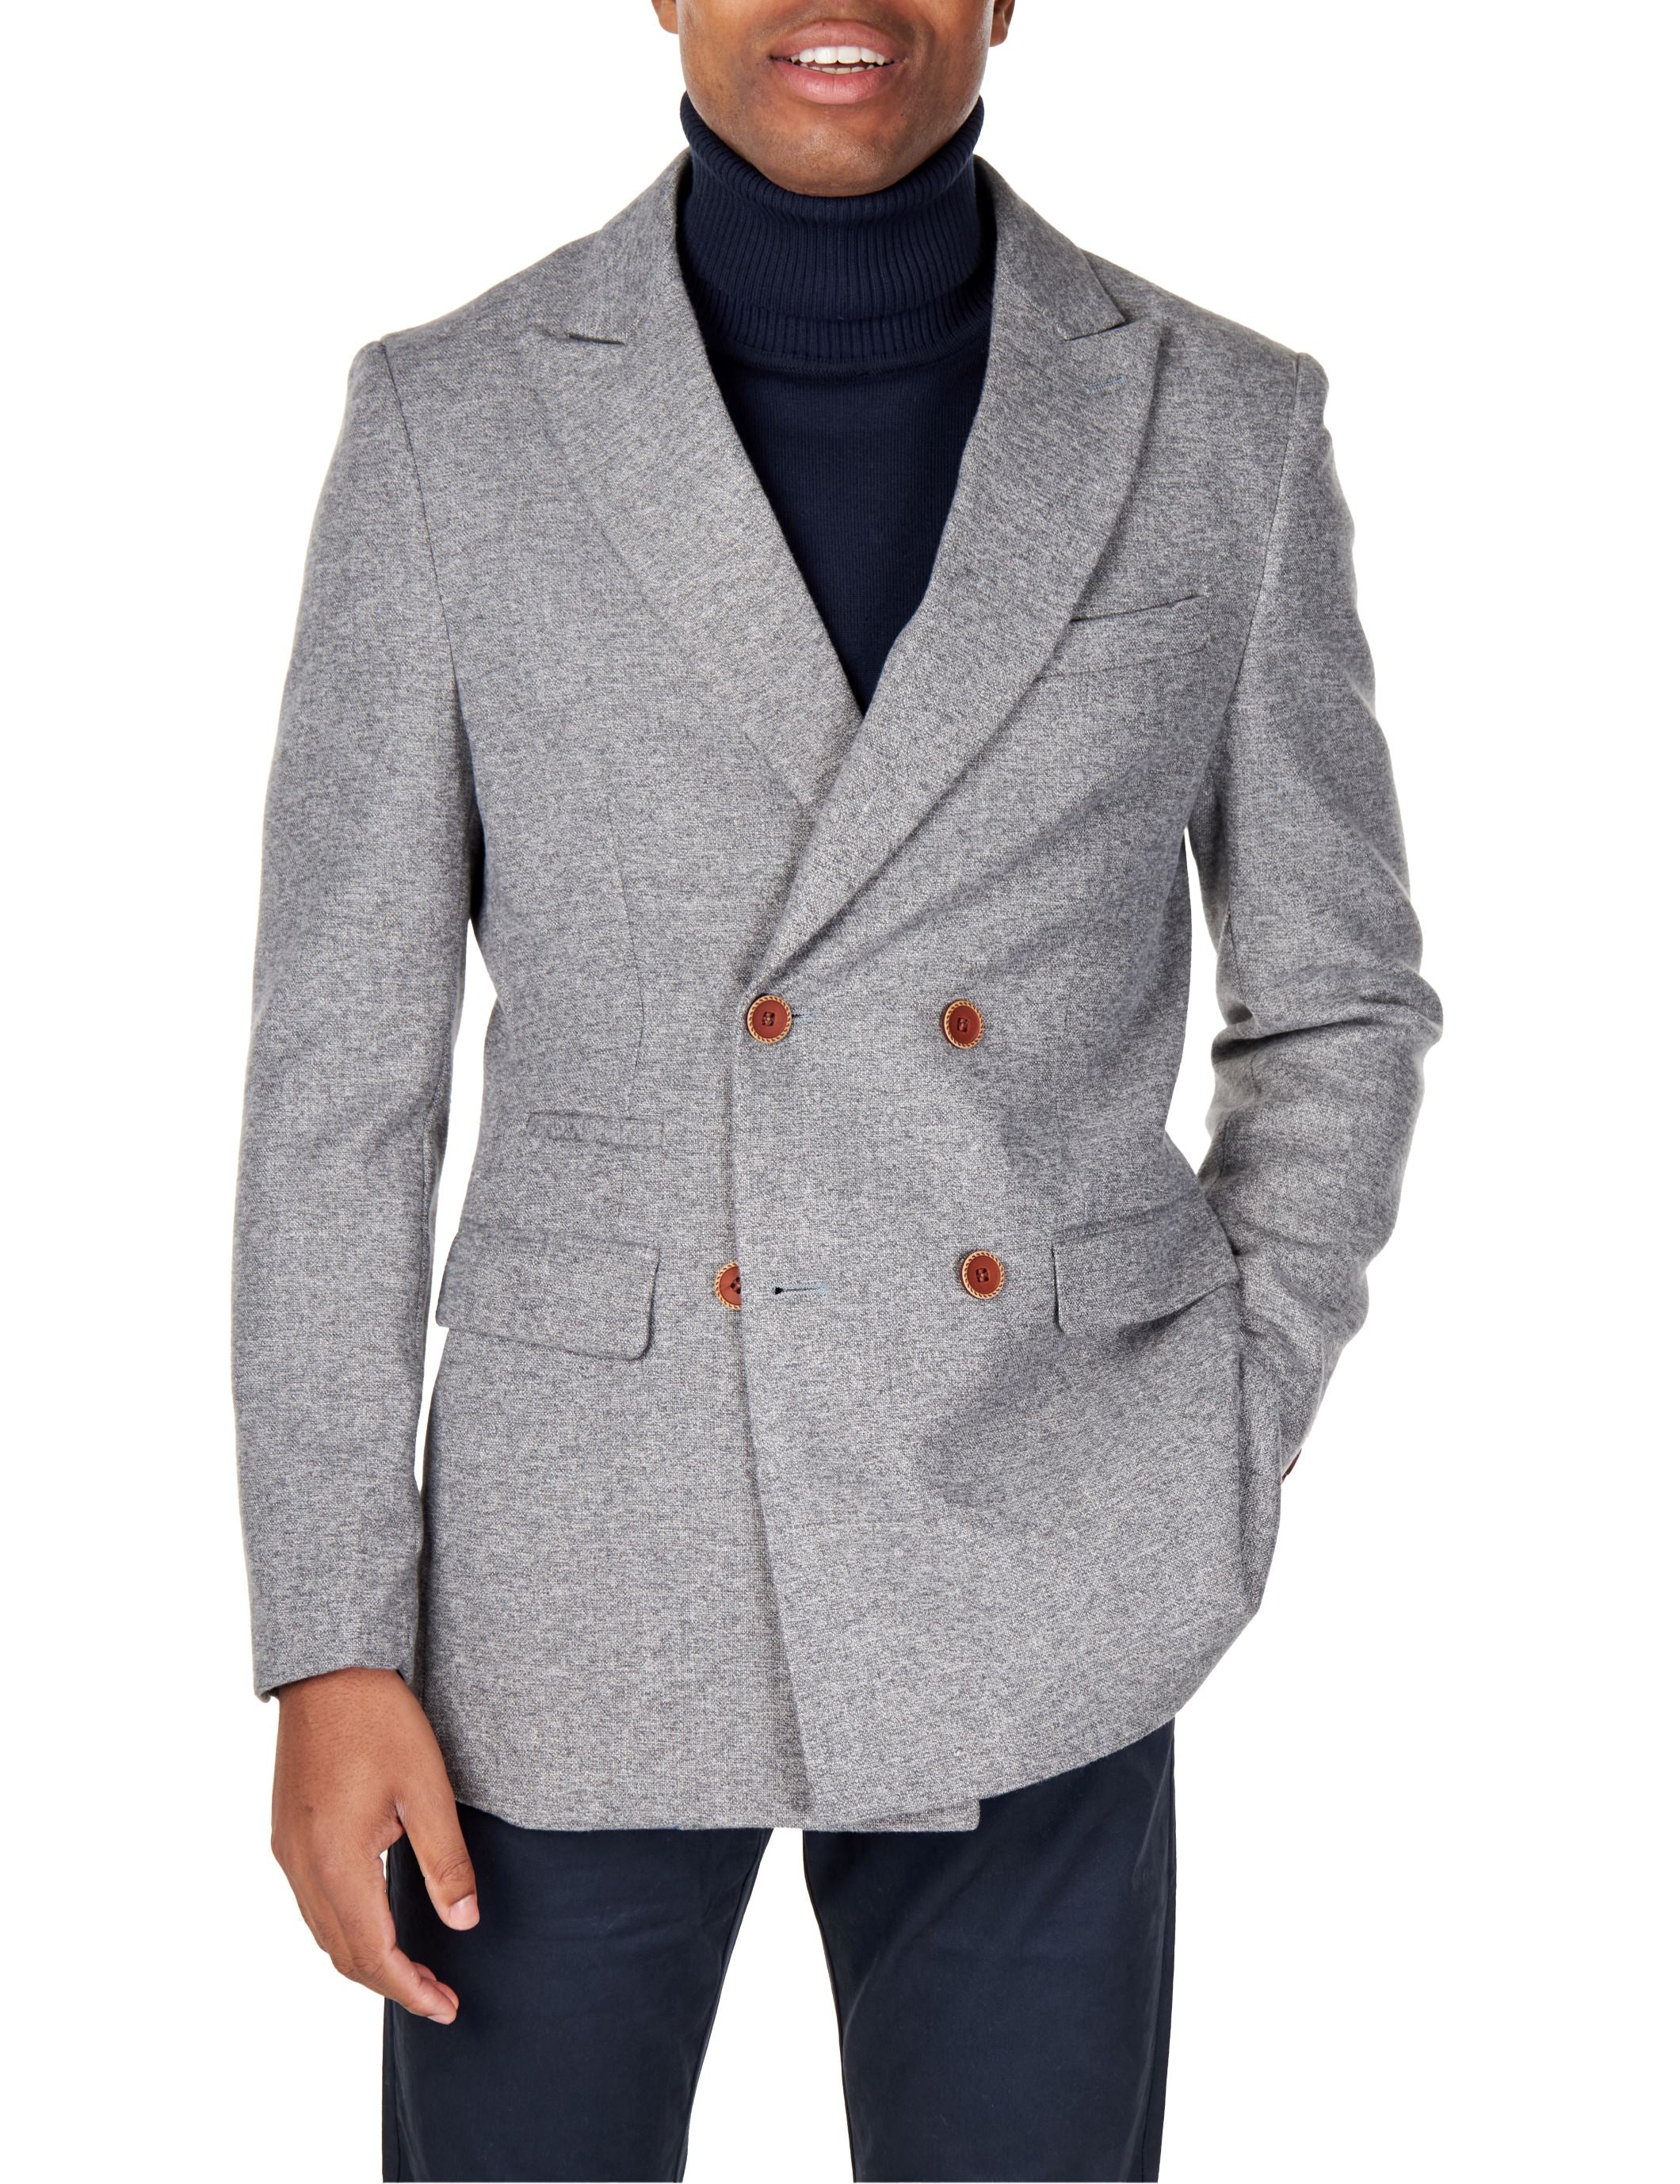 MARCO - DOUBLE BREASTED TWEED GREY JACKET – XPOSED